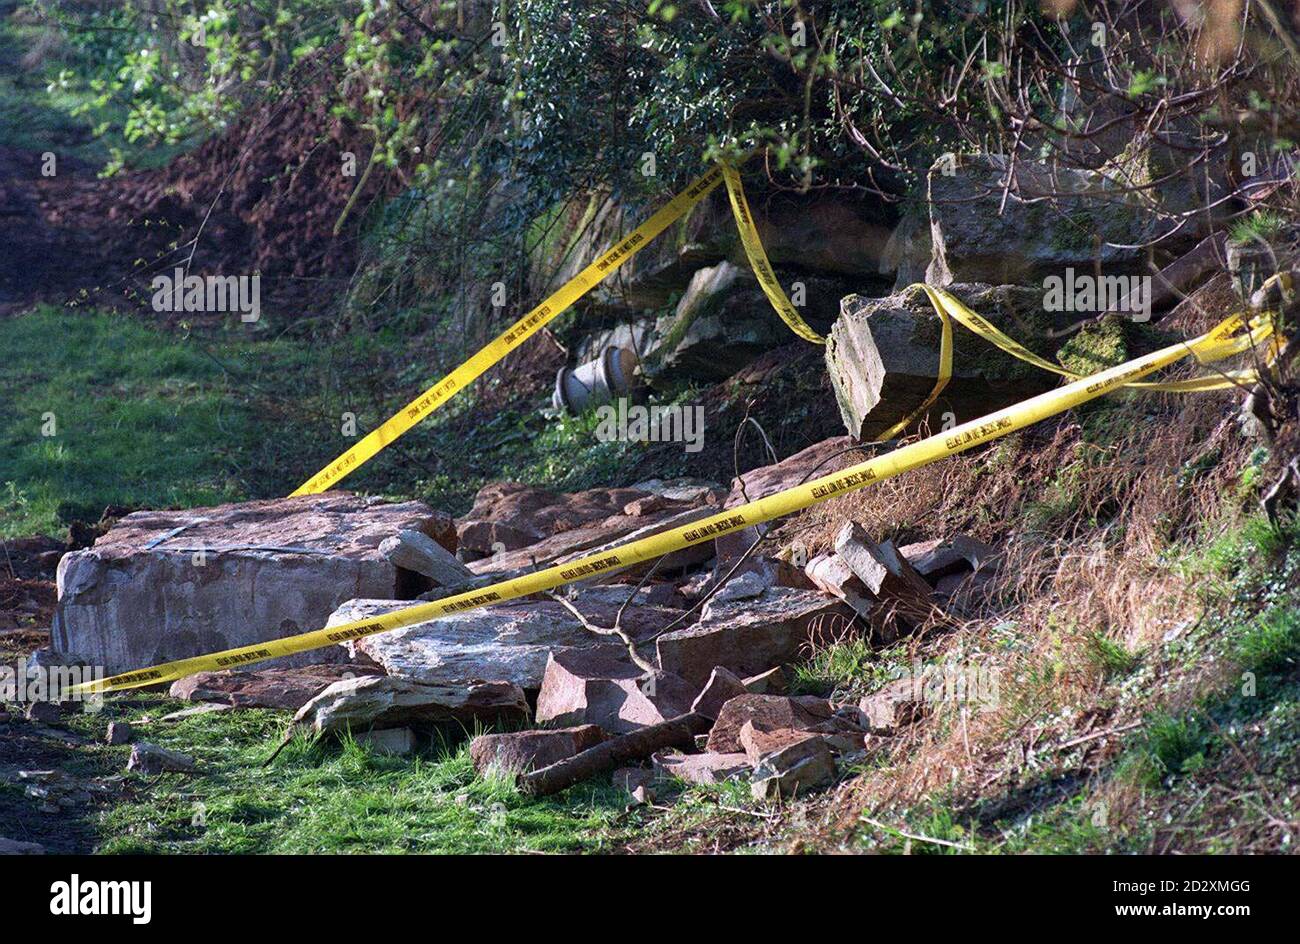 Police tape seals off the scene where Stuart Perkins and David Neil Weaver, the two scout leaders were crushed to death earlier today (Monday) when a rock escarpment fell on their tent. Fire chiefs said the rock face may have collapsed after being weakened by the heat from a camp fire. Marcus Hill ,a third leader, survived and escaped injury but suffered severe shock. See PA Story DEATH Scout. Stock Photo